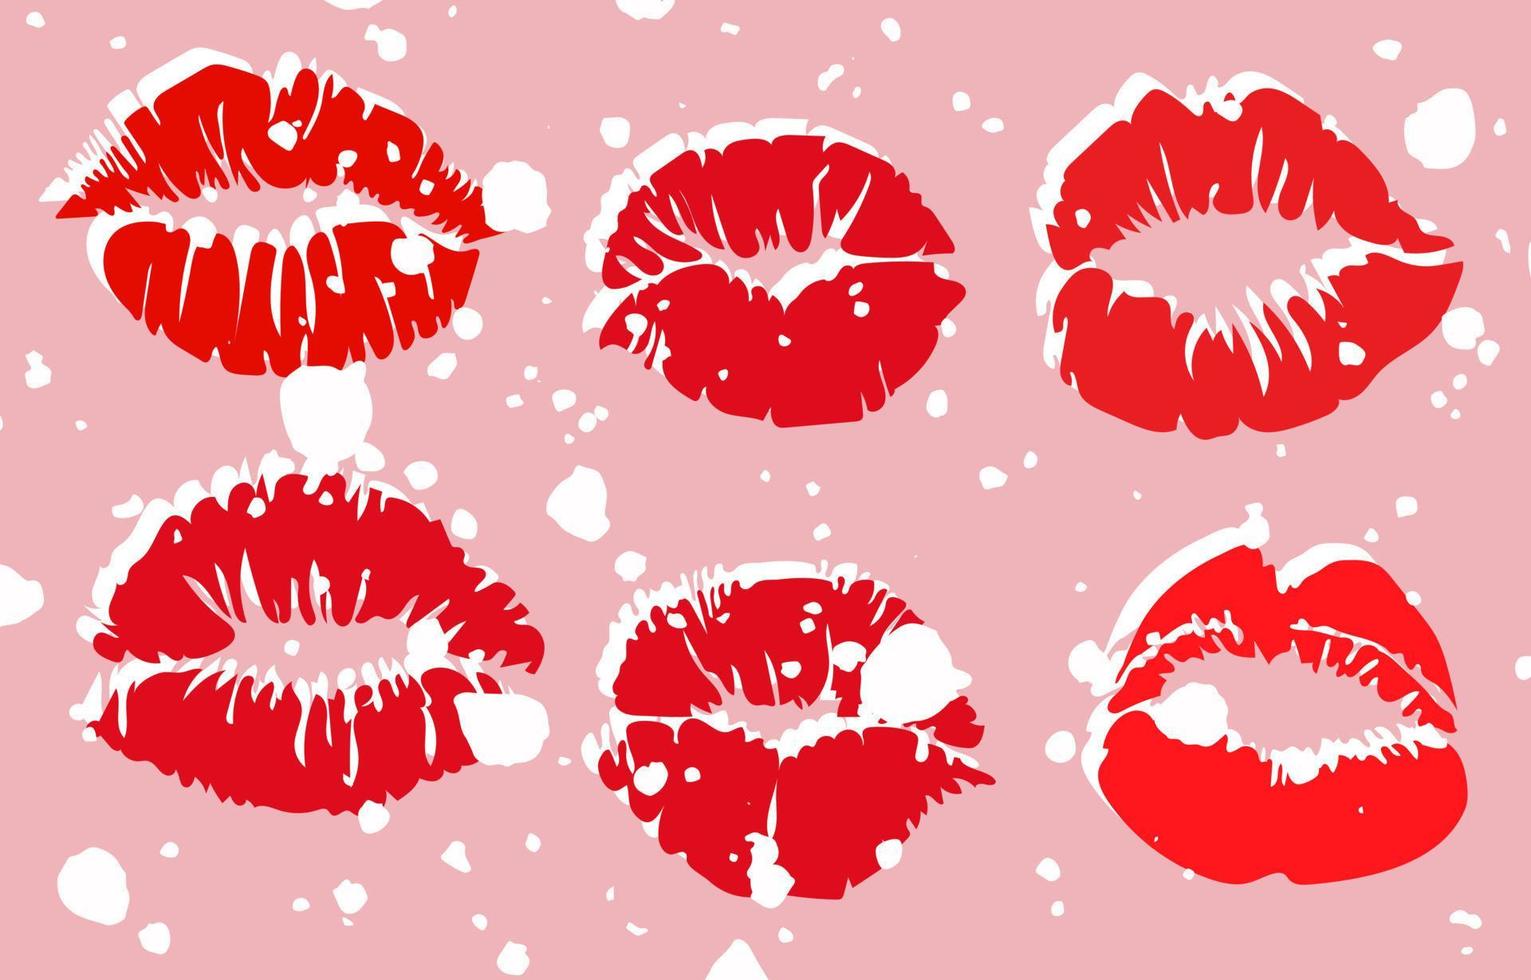 A set with red lipstick prints on a white background with noise. Lips with noise in shades of red, background for packaging. Suitable for printing on paper and textiles. For Valentine's Day. vector